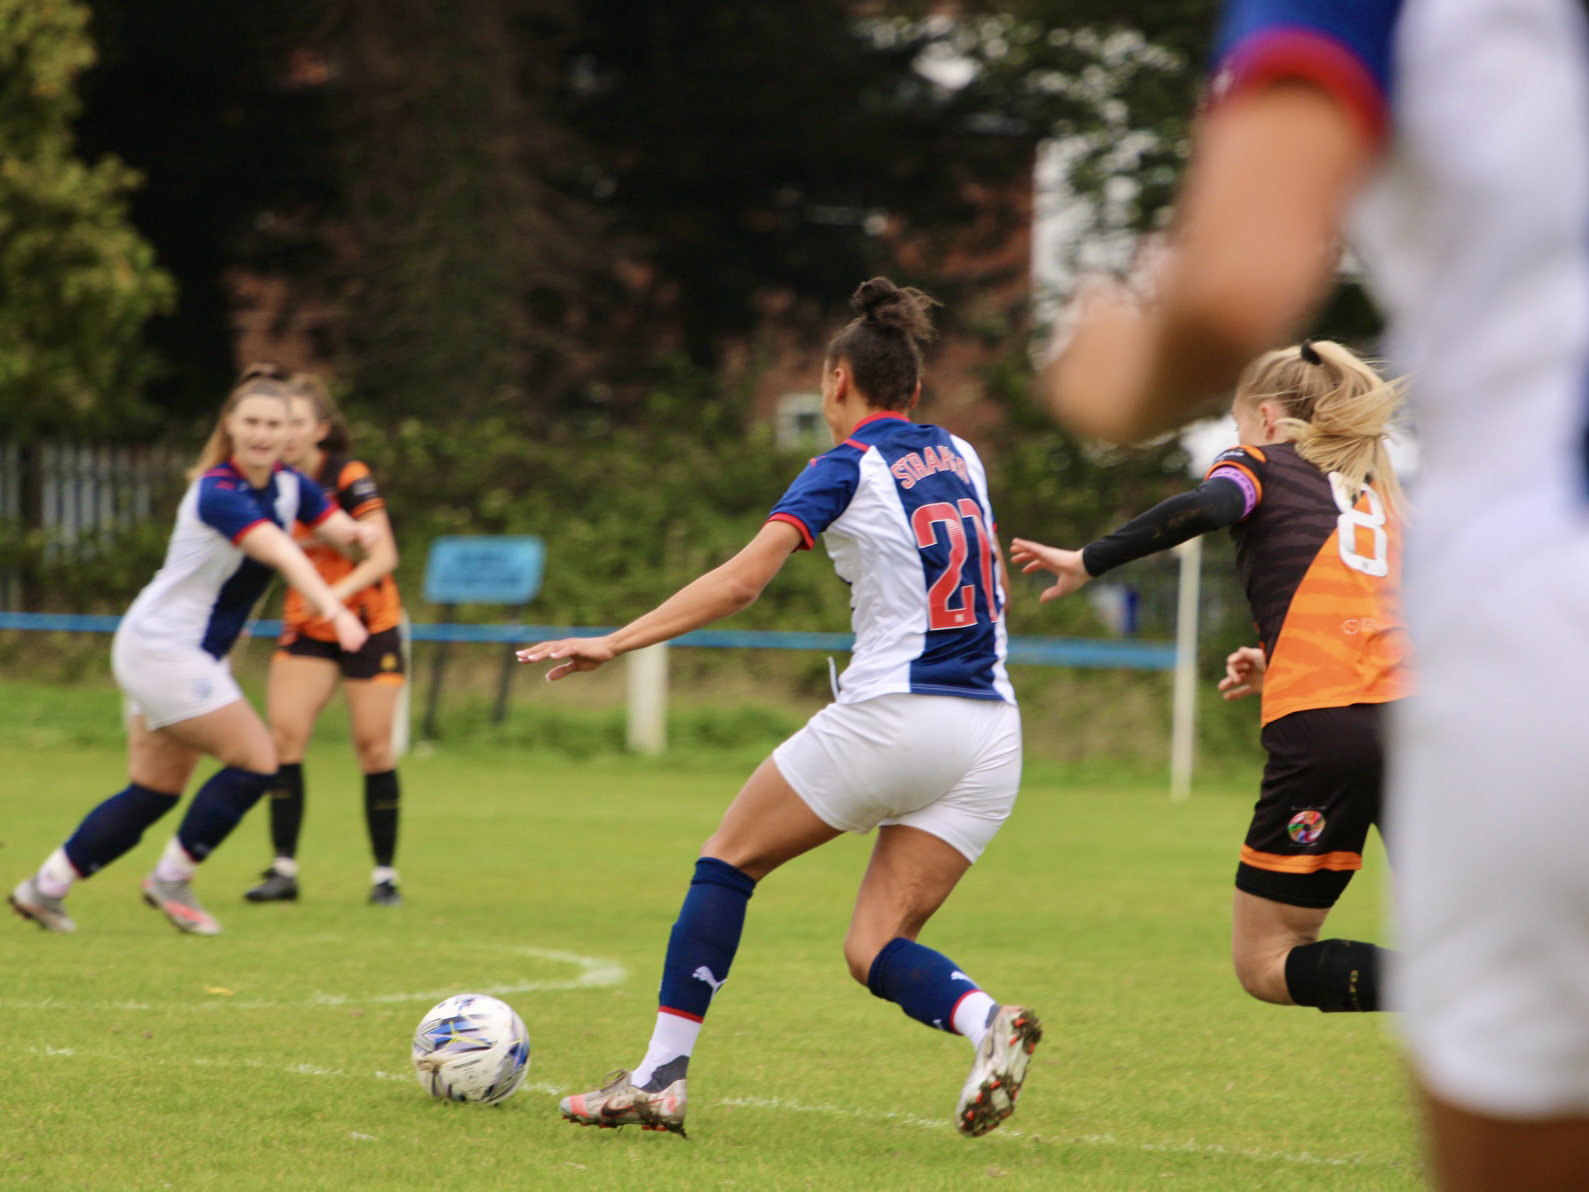 Albion Women drew 0-0 with Hull City at Haworth Park in the FA Women’s National League Premier Division on Sunday